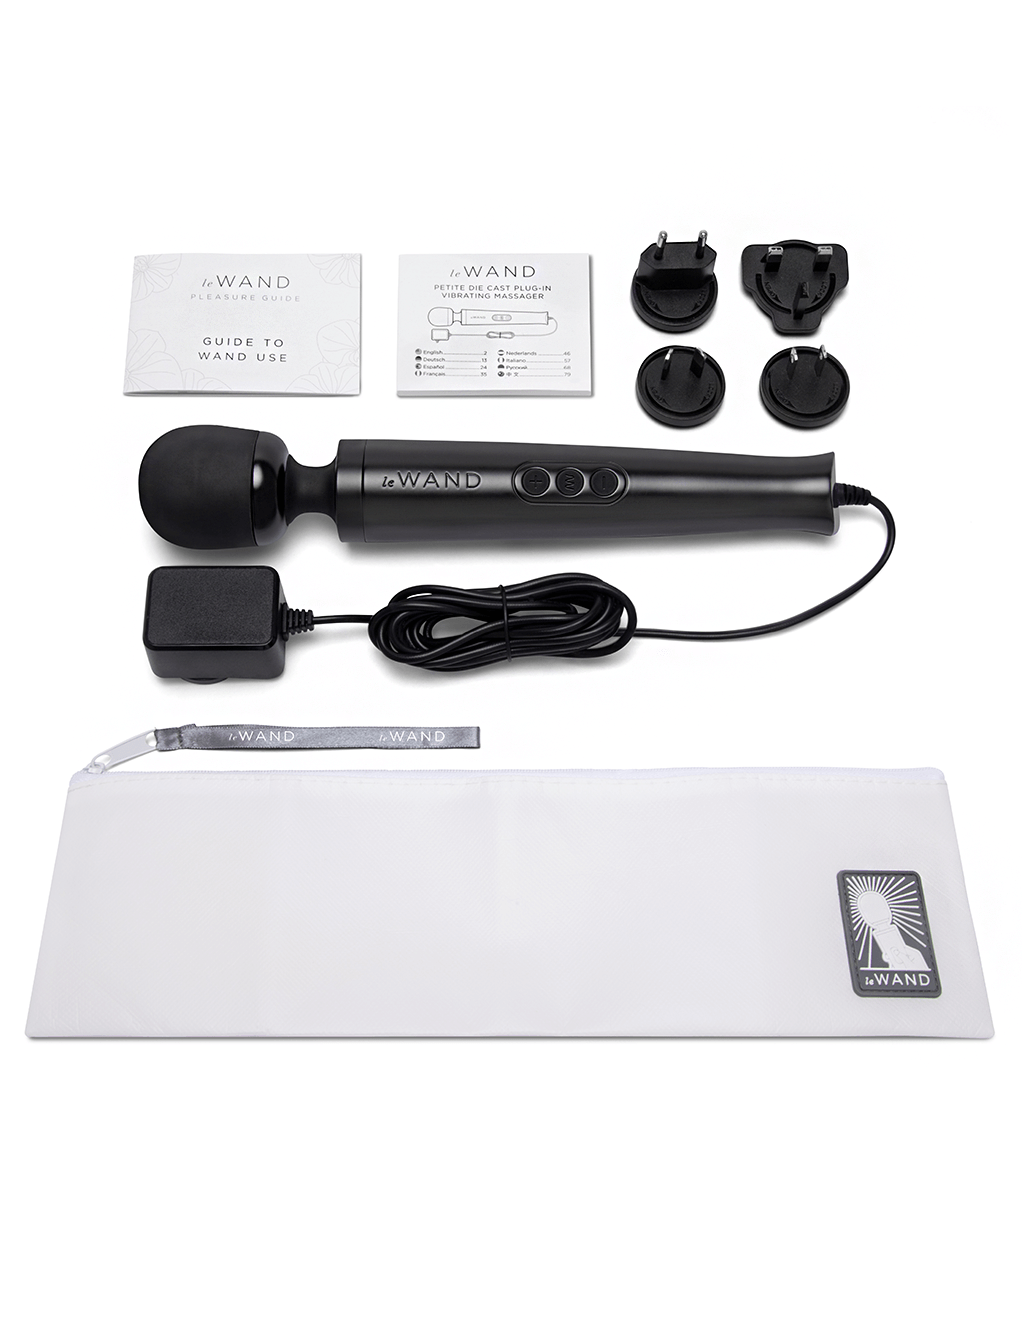 Le Wand Diecast Plug-In Vibrating Wand - Black - Box Contents